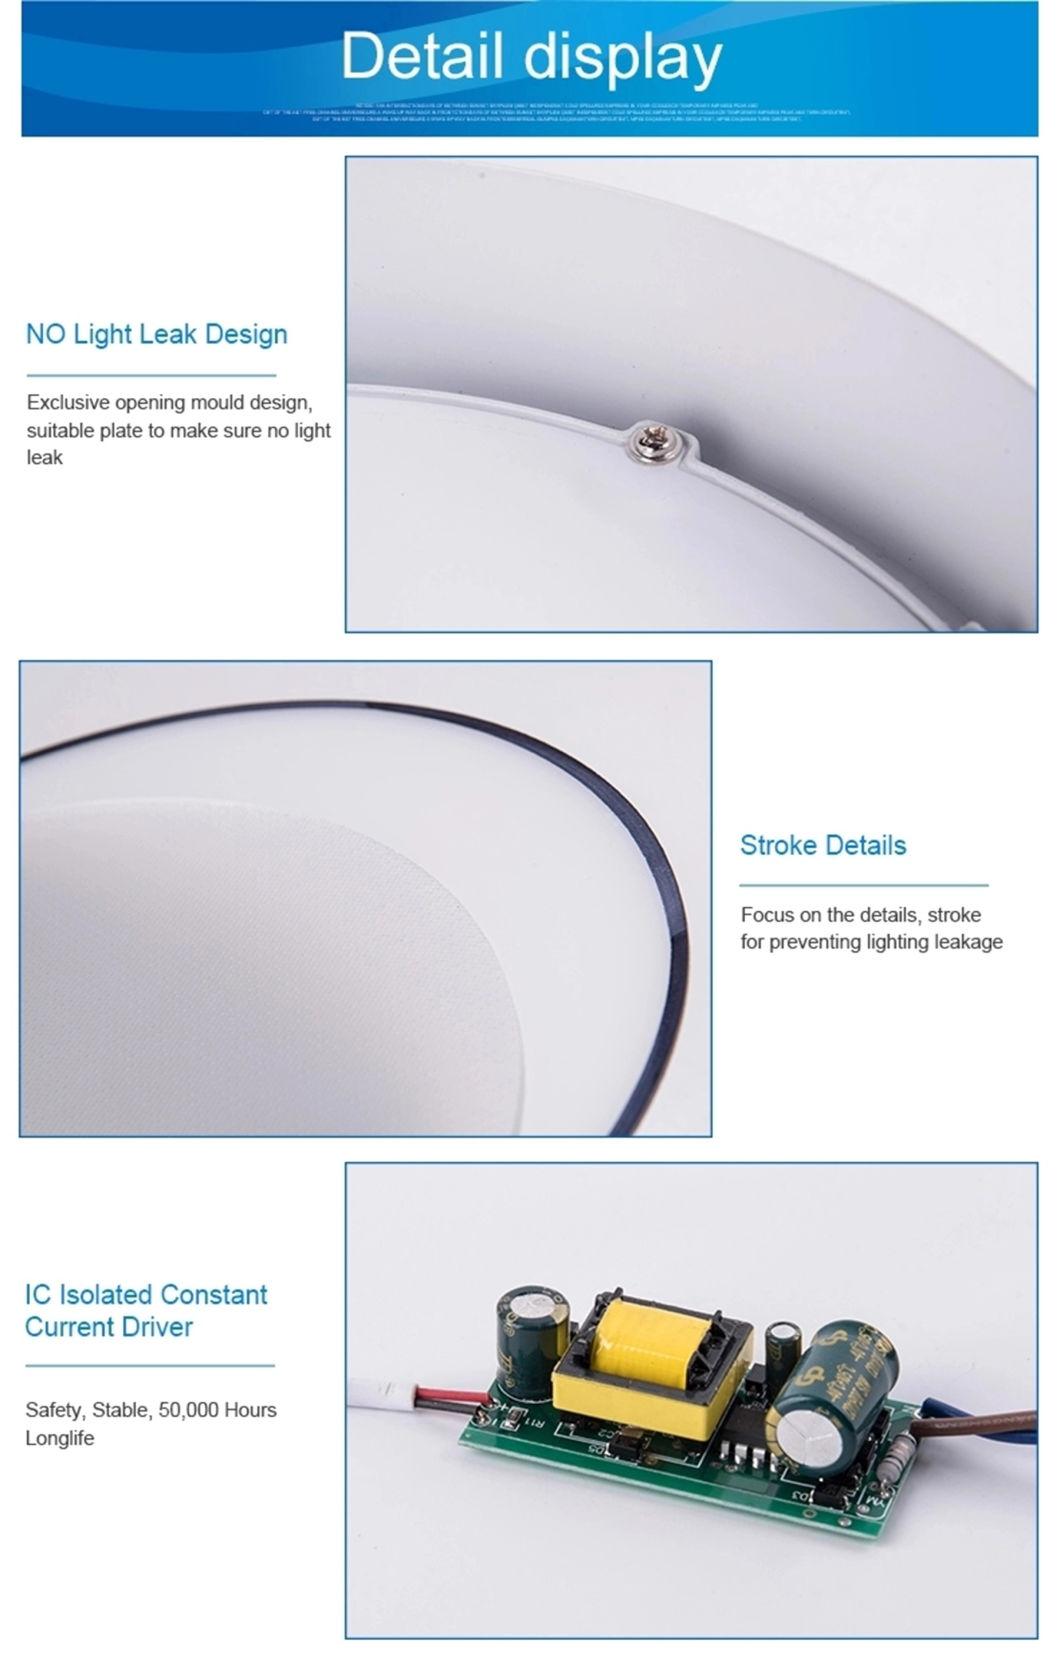 Ceiling Flat Panel Down Light Energy Saving a+ Ultra Slim Lamp Recessed Recessed LED Panel Light for Kitchen